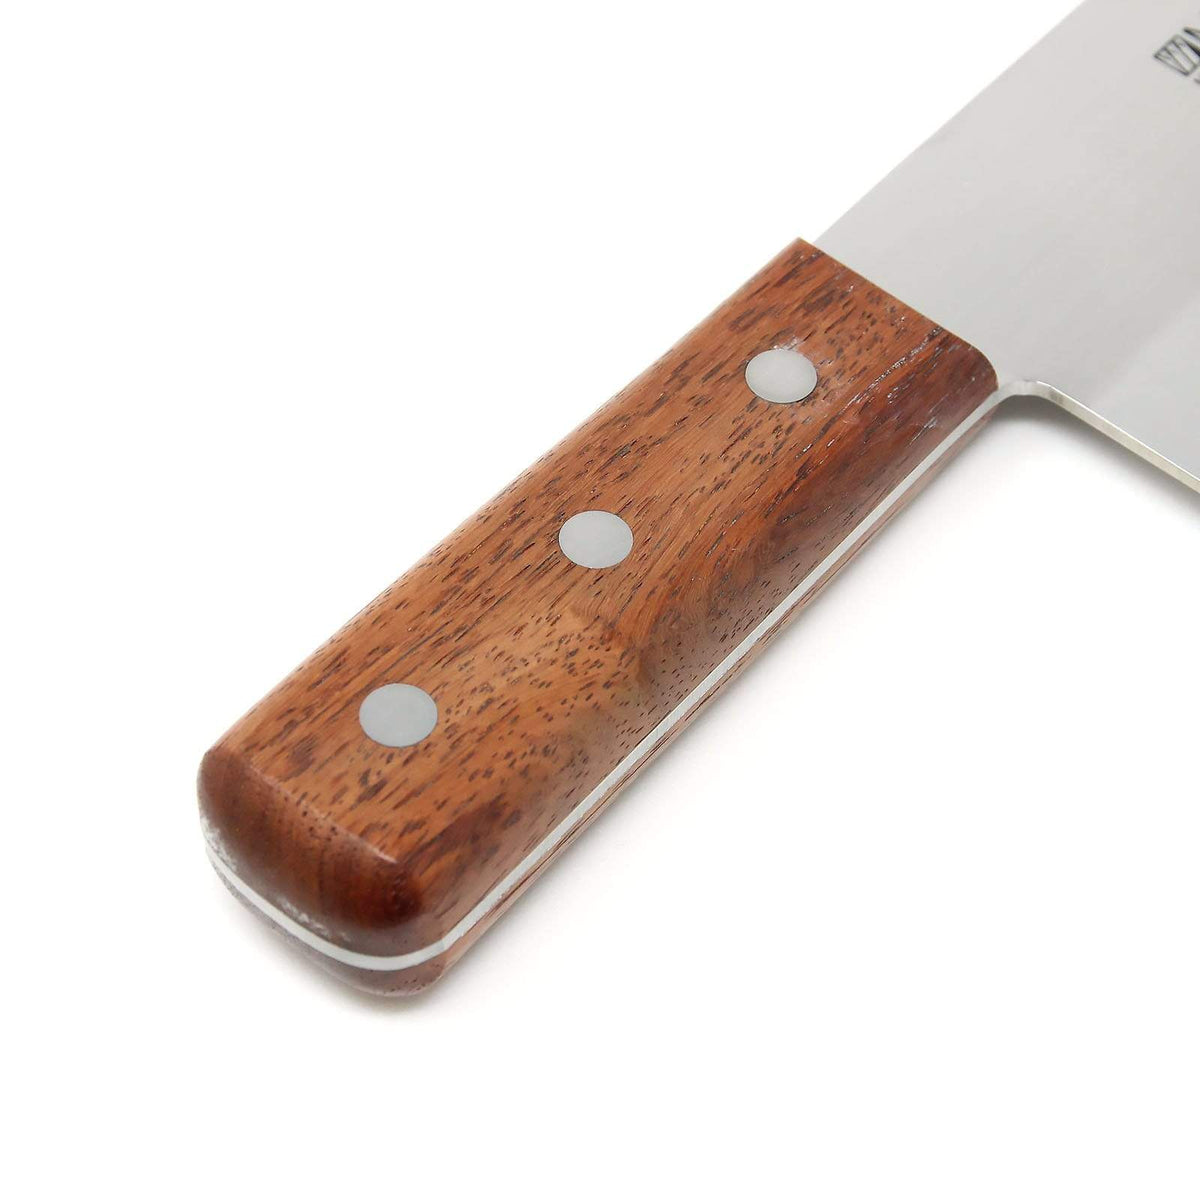 Misono 440-Series Chinese Cleaver 220mm Chinese Cleavers